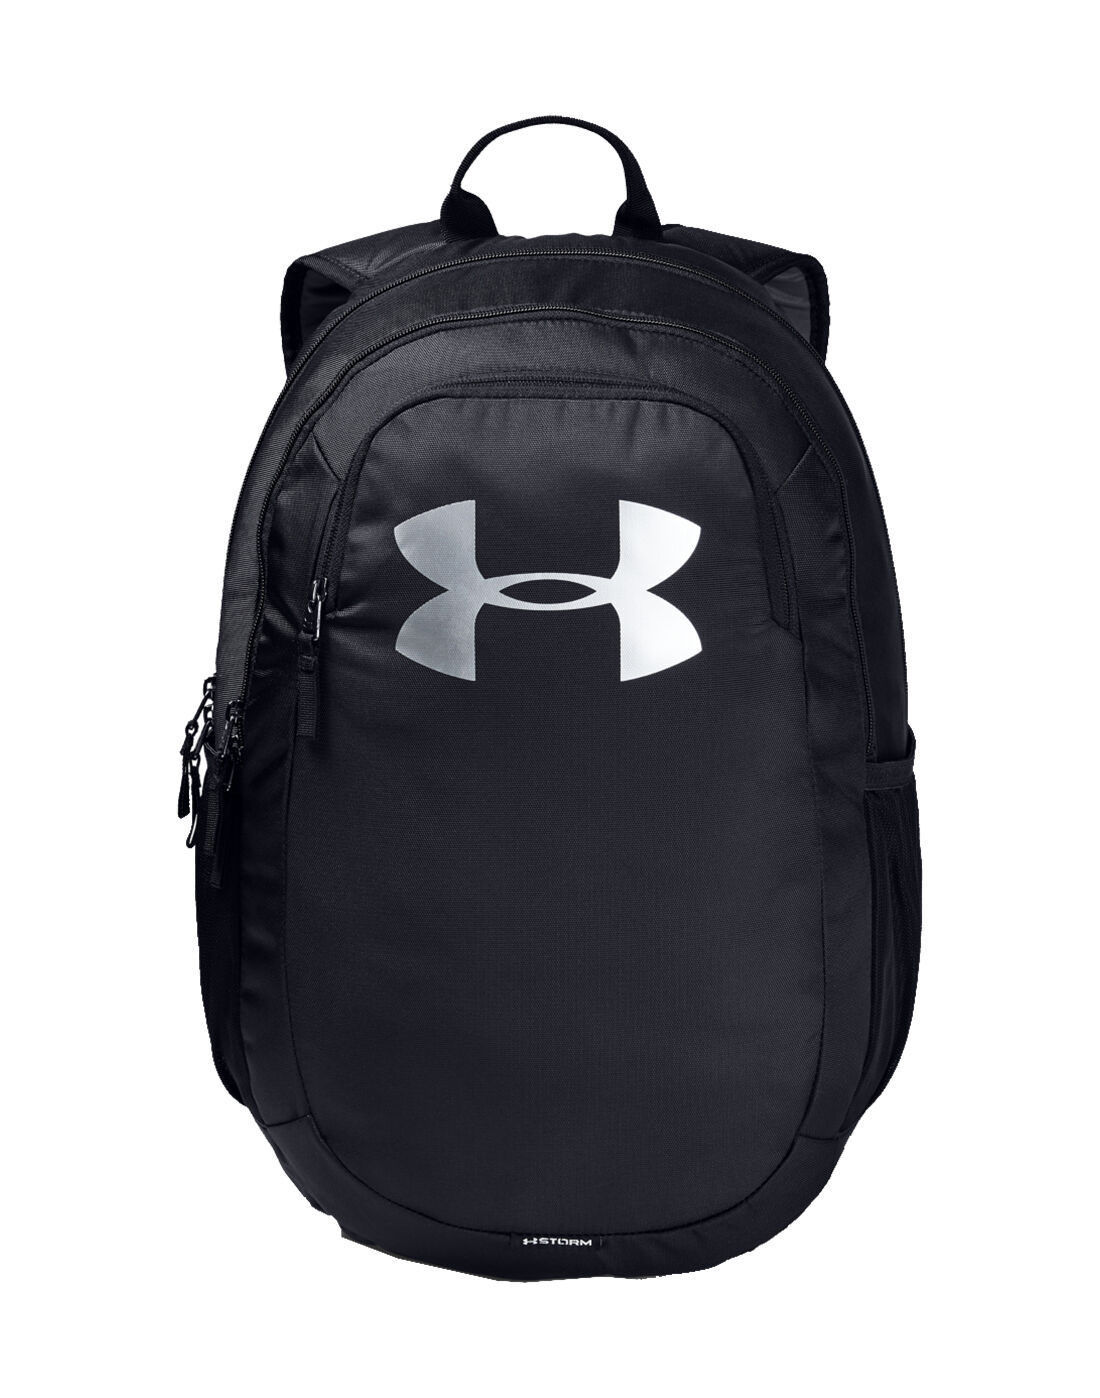 Under Armour Scrimmage Backpack | Life 